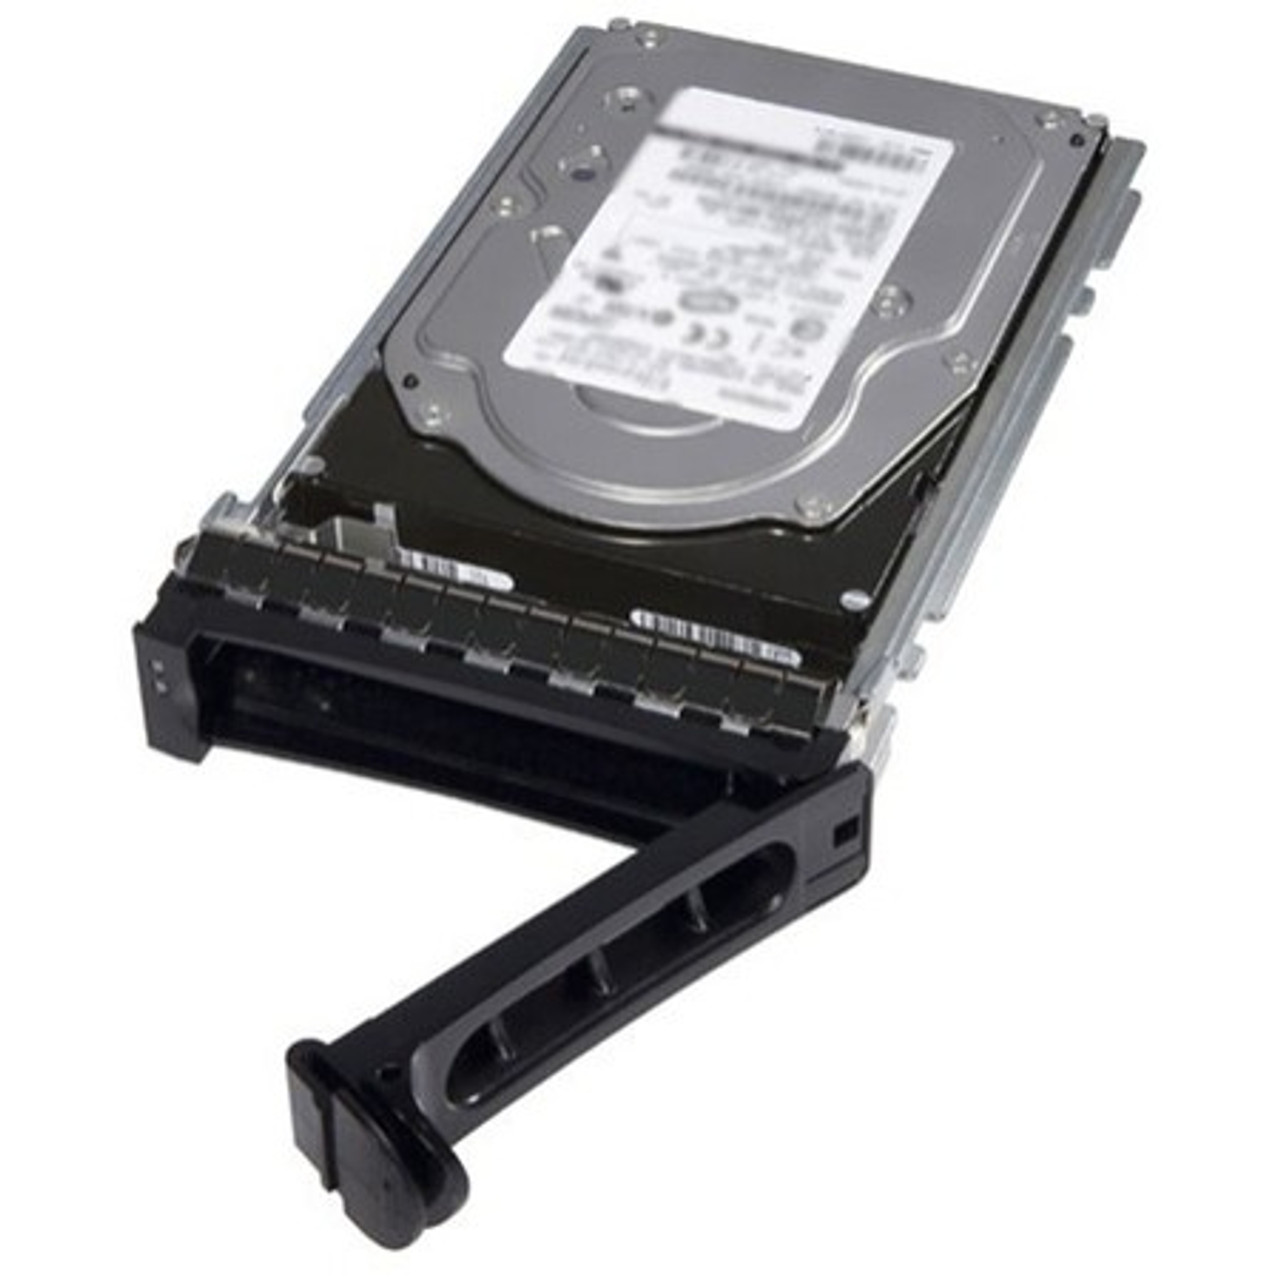 DELL J8091 147gb 15000rpm Sas-3gbps 16mb Buffer 3.5inch Hard Disk Drive With Tray